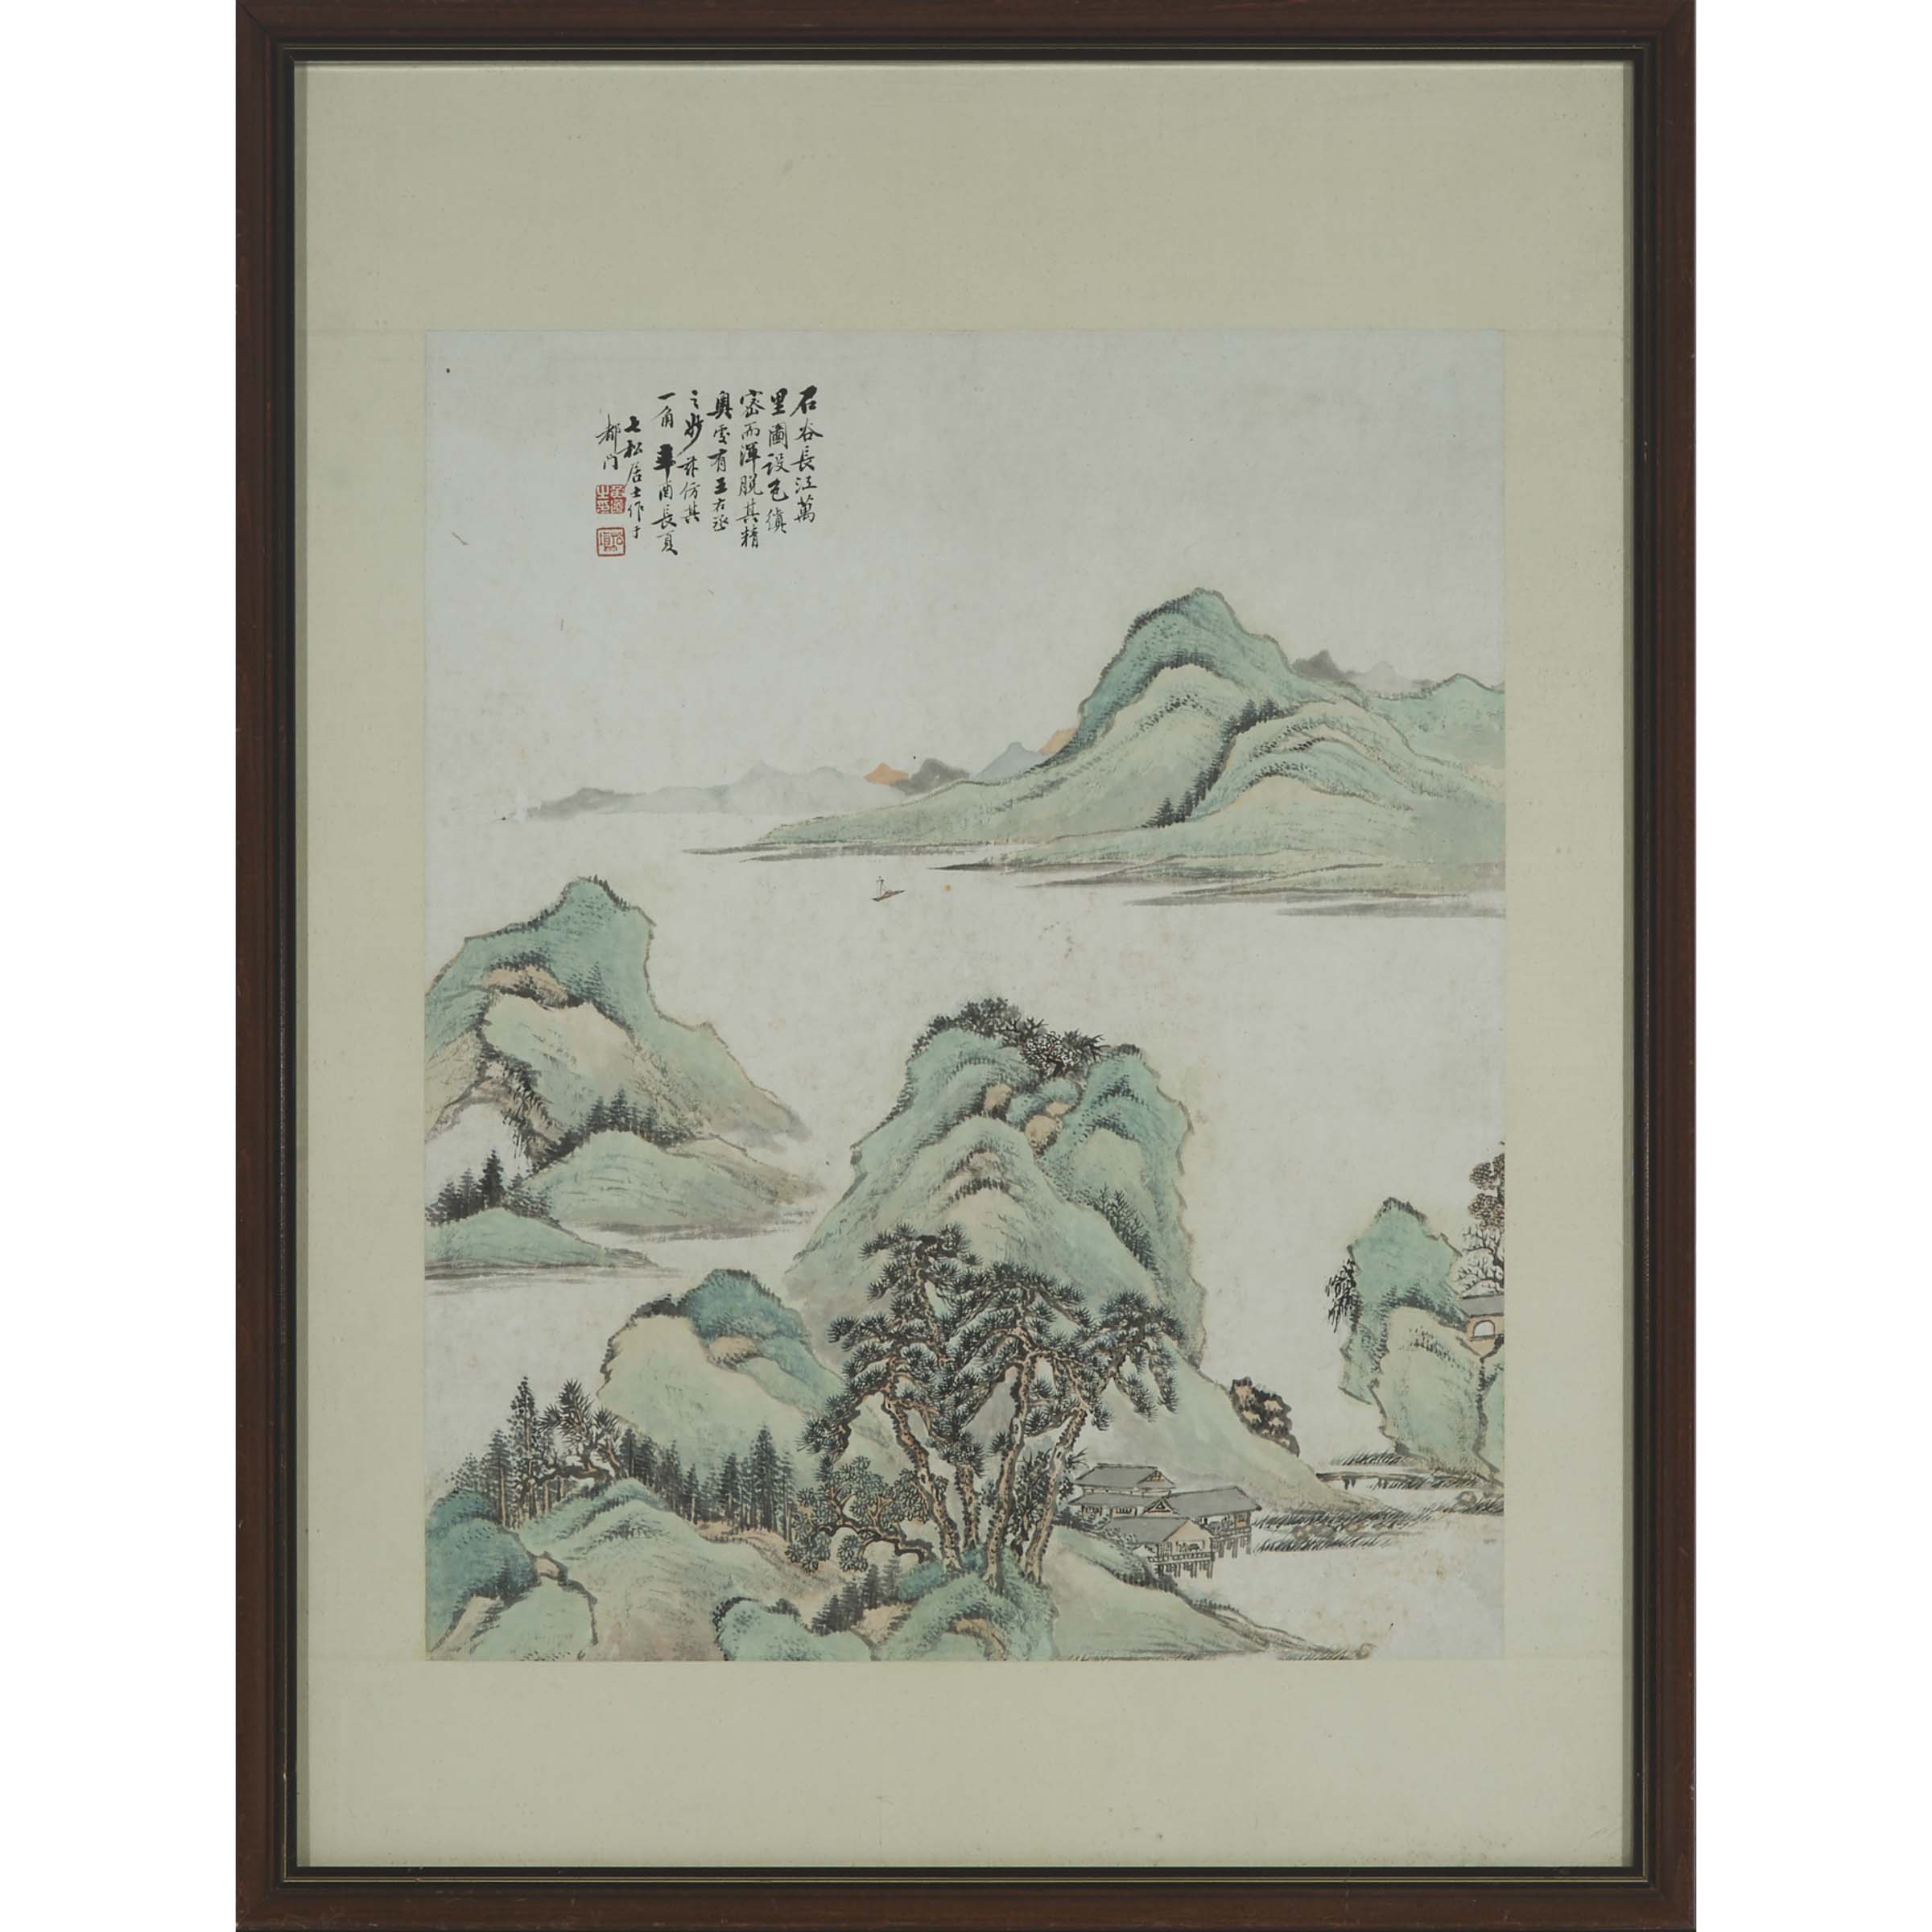 Huang Yi (Republican Period), Landscape, Signed and Dated 1921